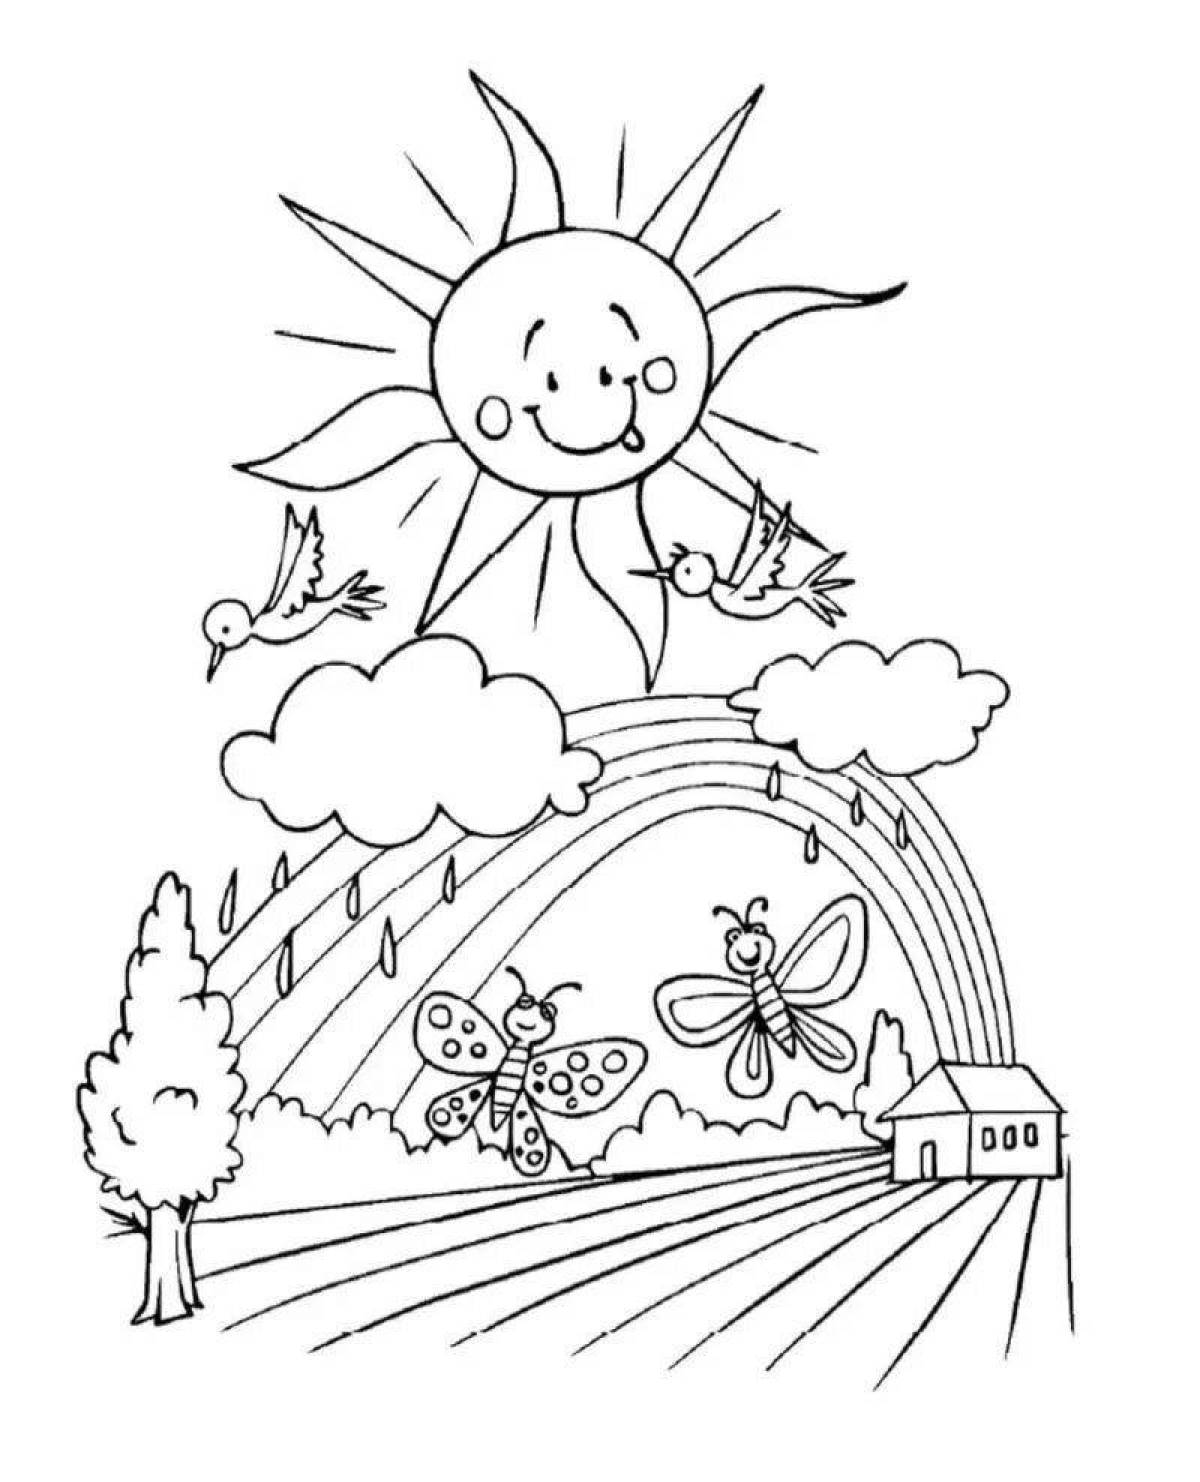 Calm, may there always be peace coloring page